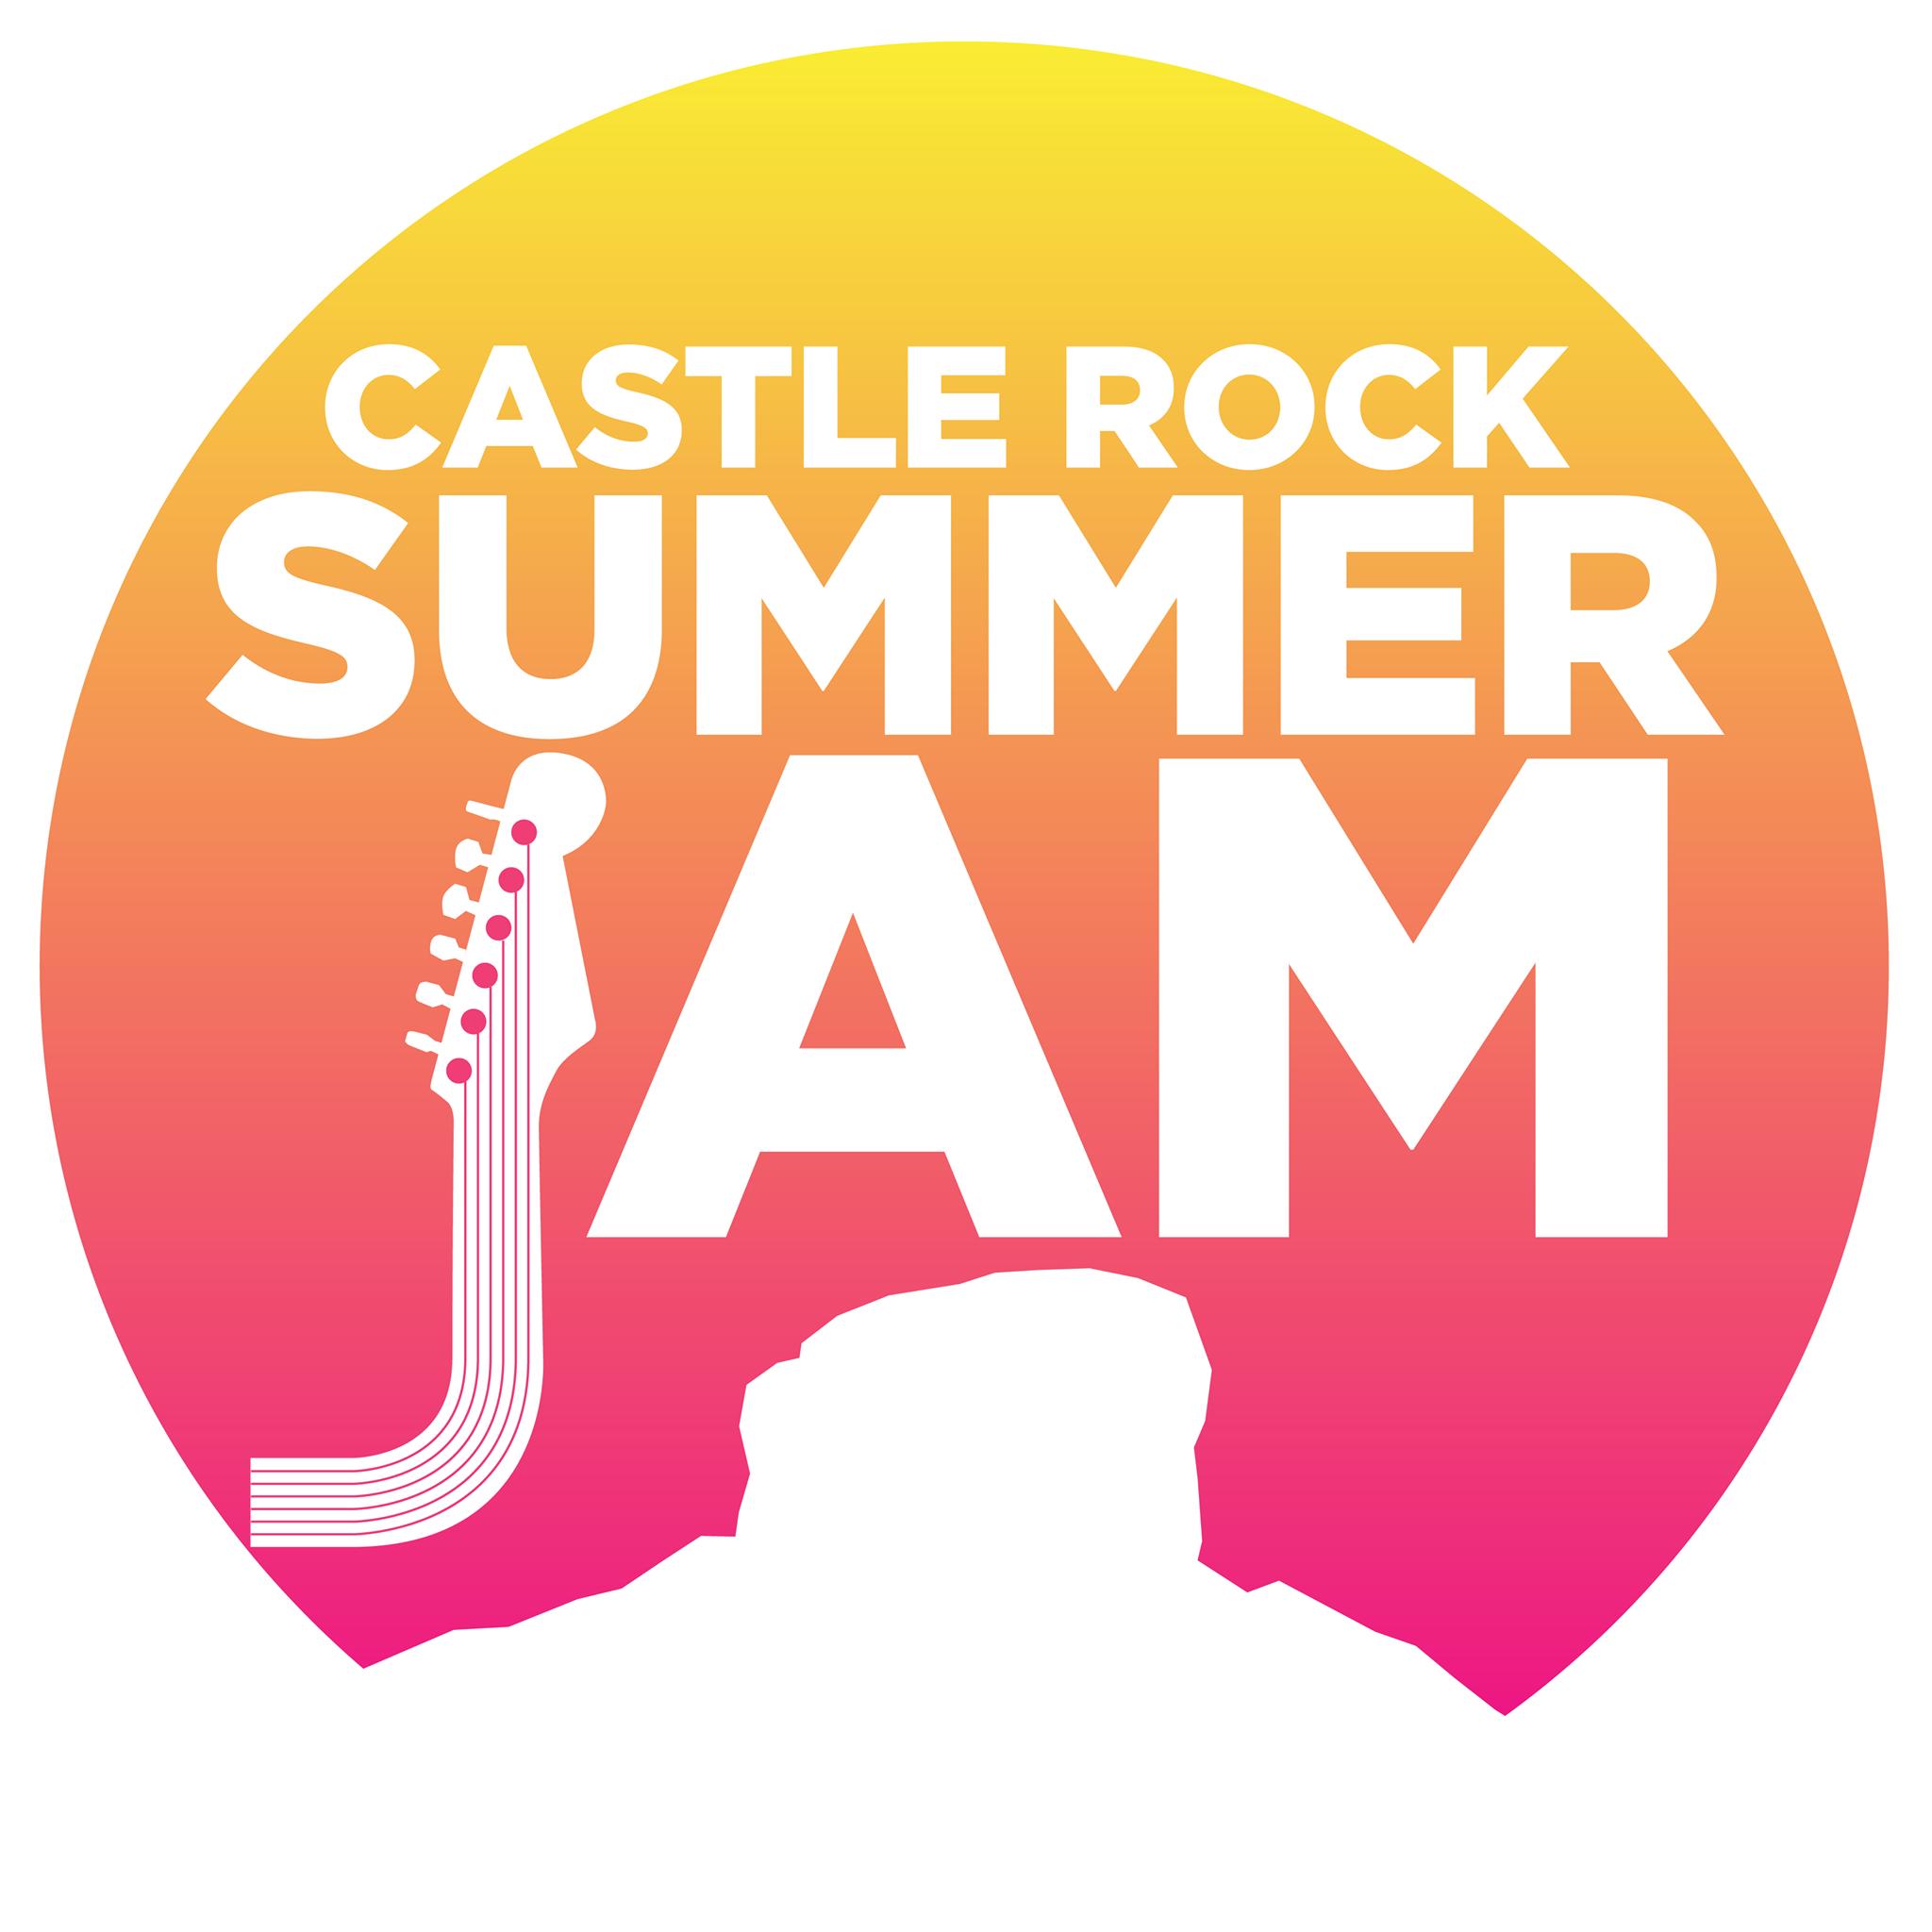 COLORADO, it's the countdown to Castle Rock Summer Jam on 7/29! 